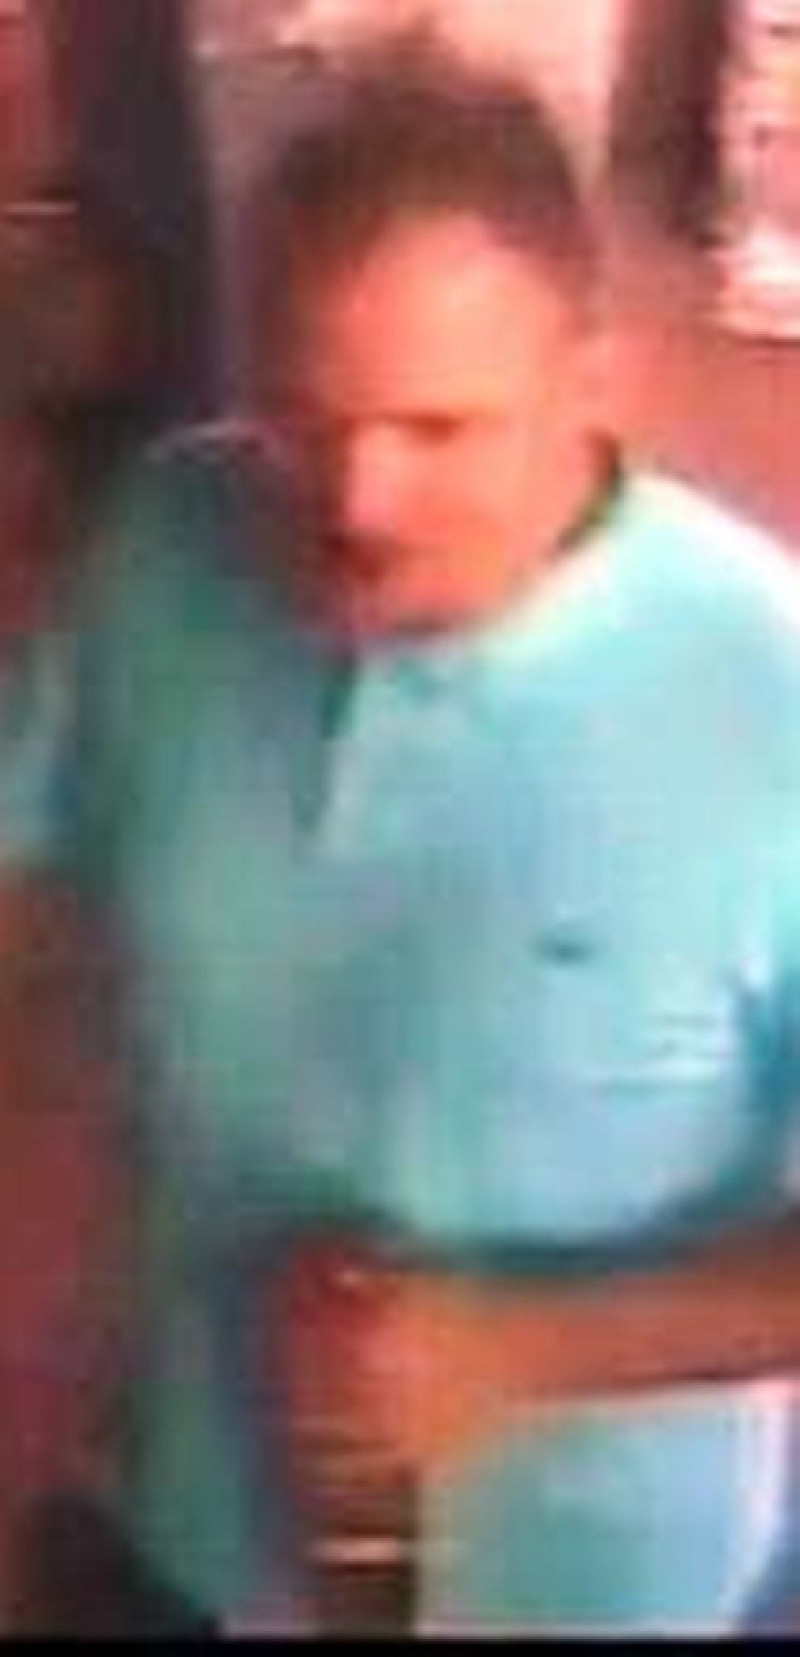 Main image for CCTV released after cowardly attack on train passenger